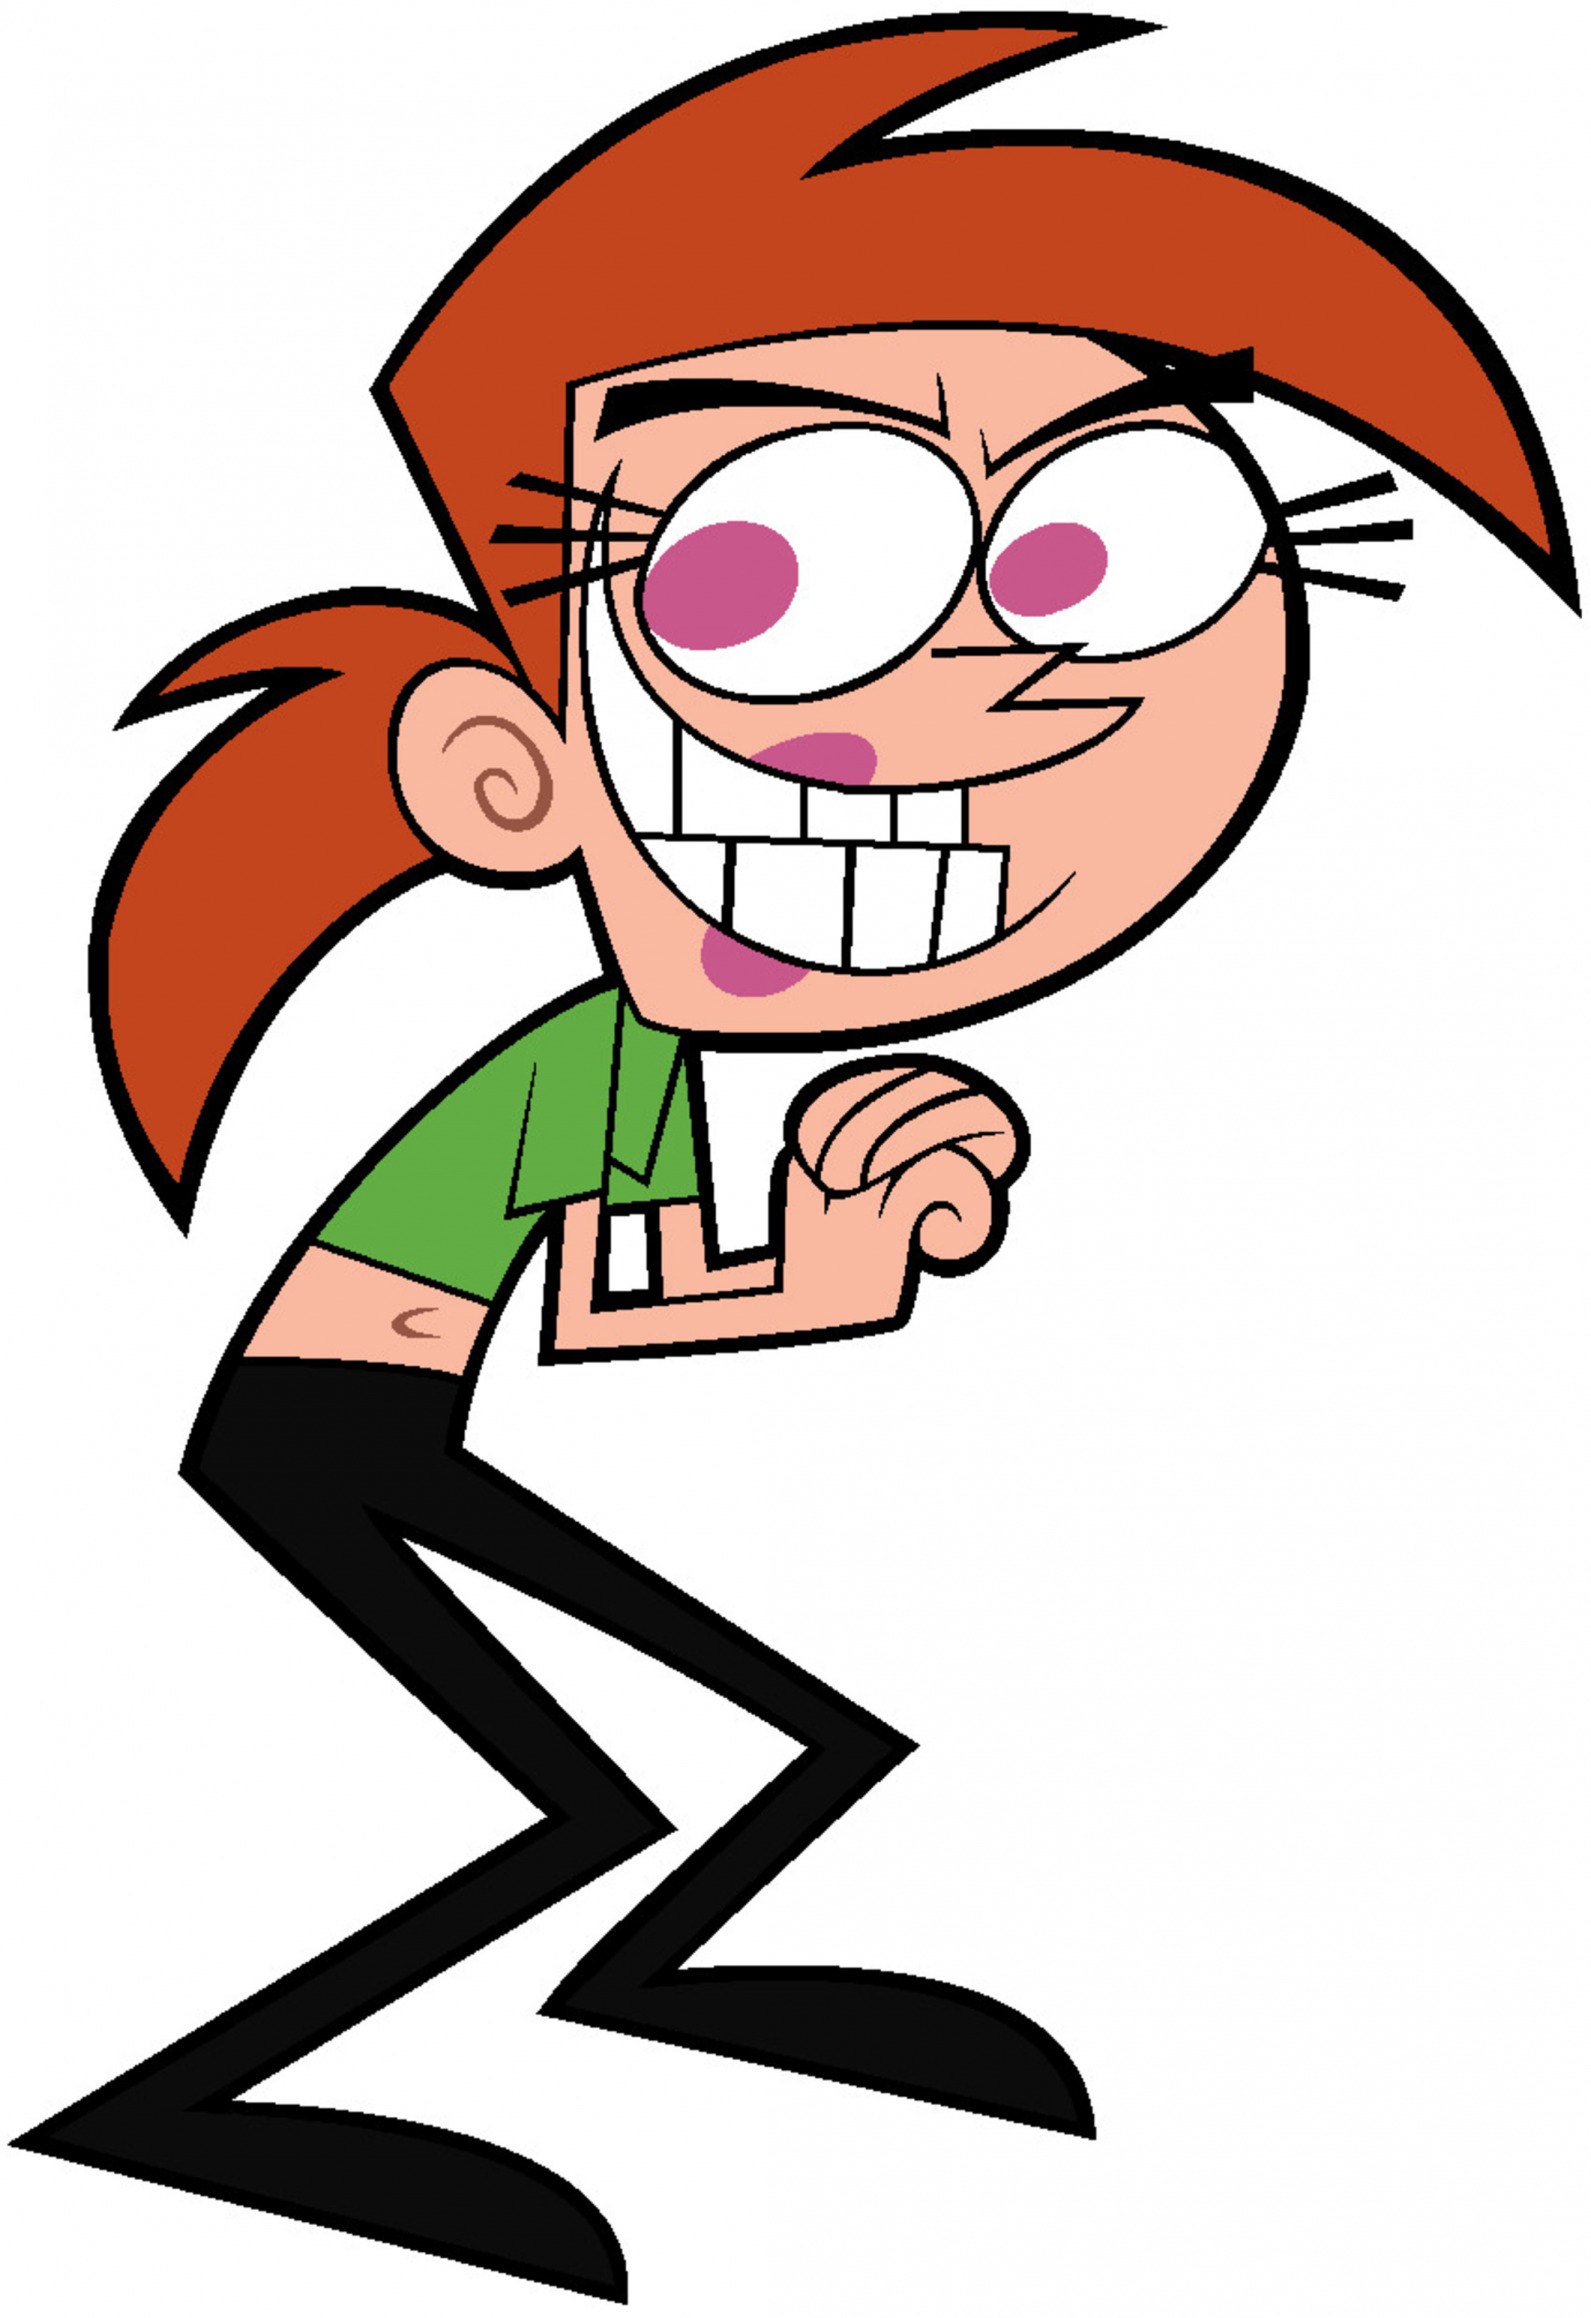 Vicky the Babysitter from The Fairly OddParents Blank Meme Template